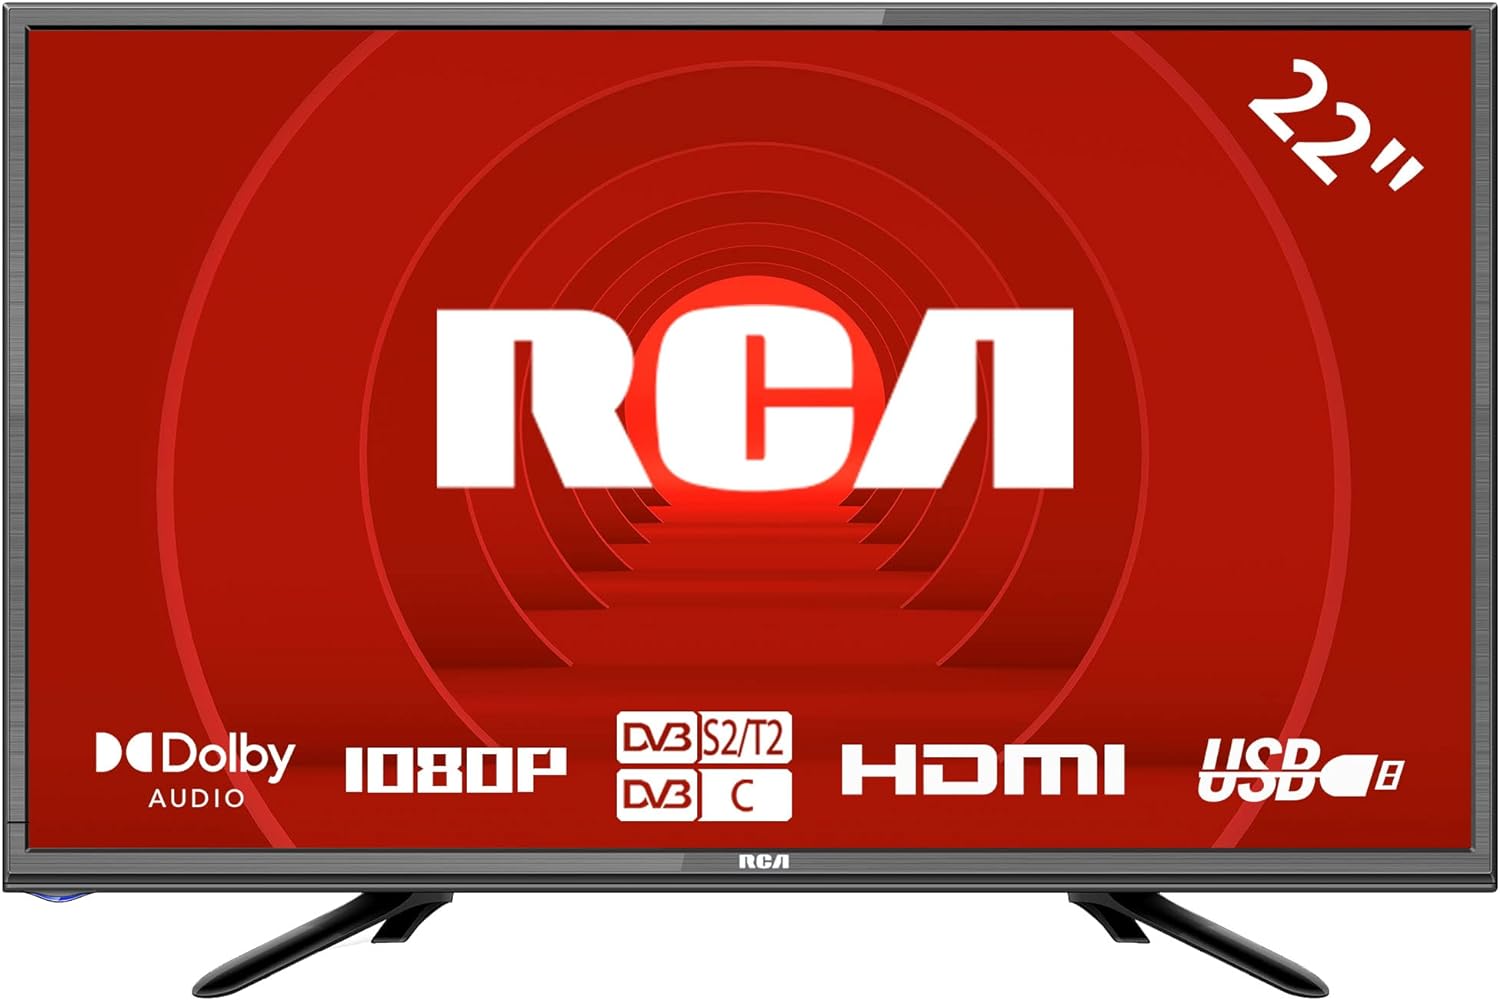 RCA RB22HT5 22 Inch FHD TV, Freeview HD DVB - T2 - C - S2 Dolby Digital Audio Kitchen TV, FHD LED Backlighting Display, HDMI VGA PC Audio SCART USB Record Media Player, Small TV for Small Lounge Kitchen - Amazing Gadgets Outlet